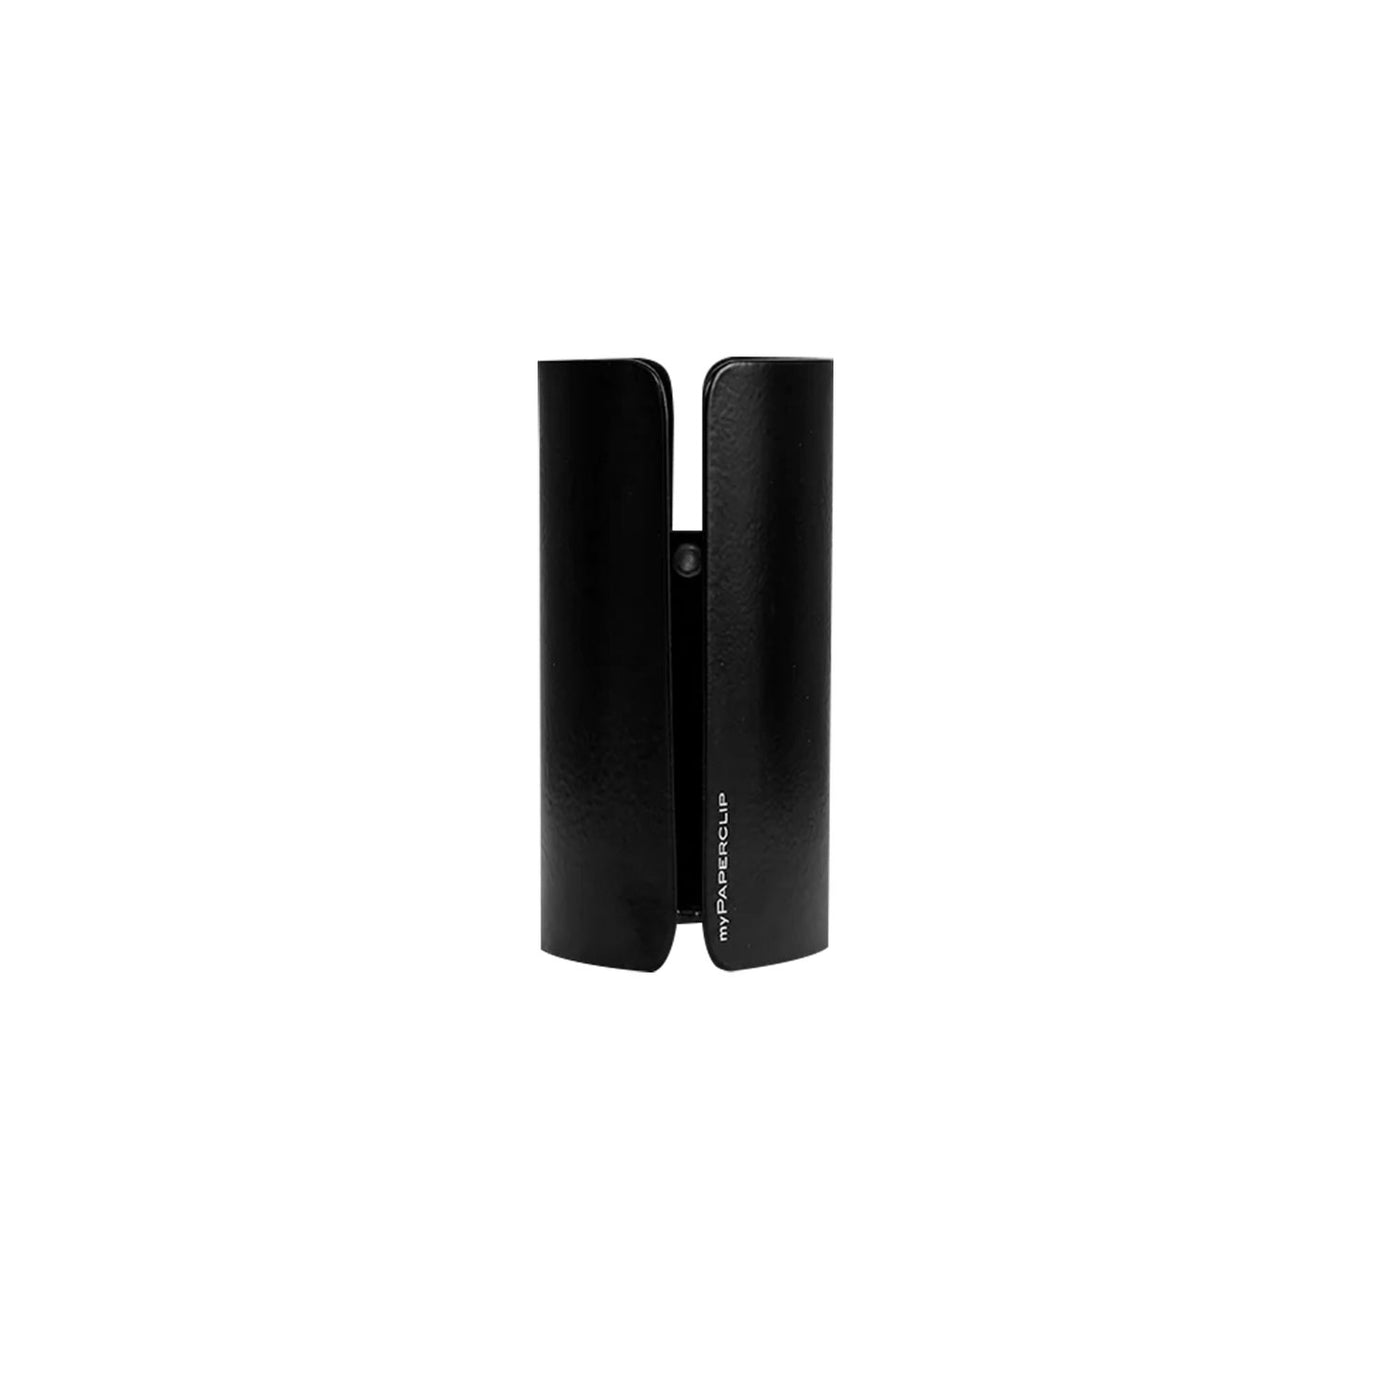 myPAPERCLIP Metal Pen Stand - Black 1